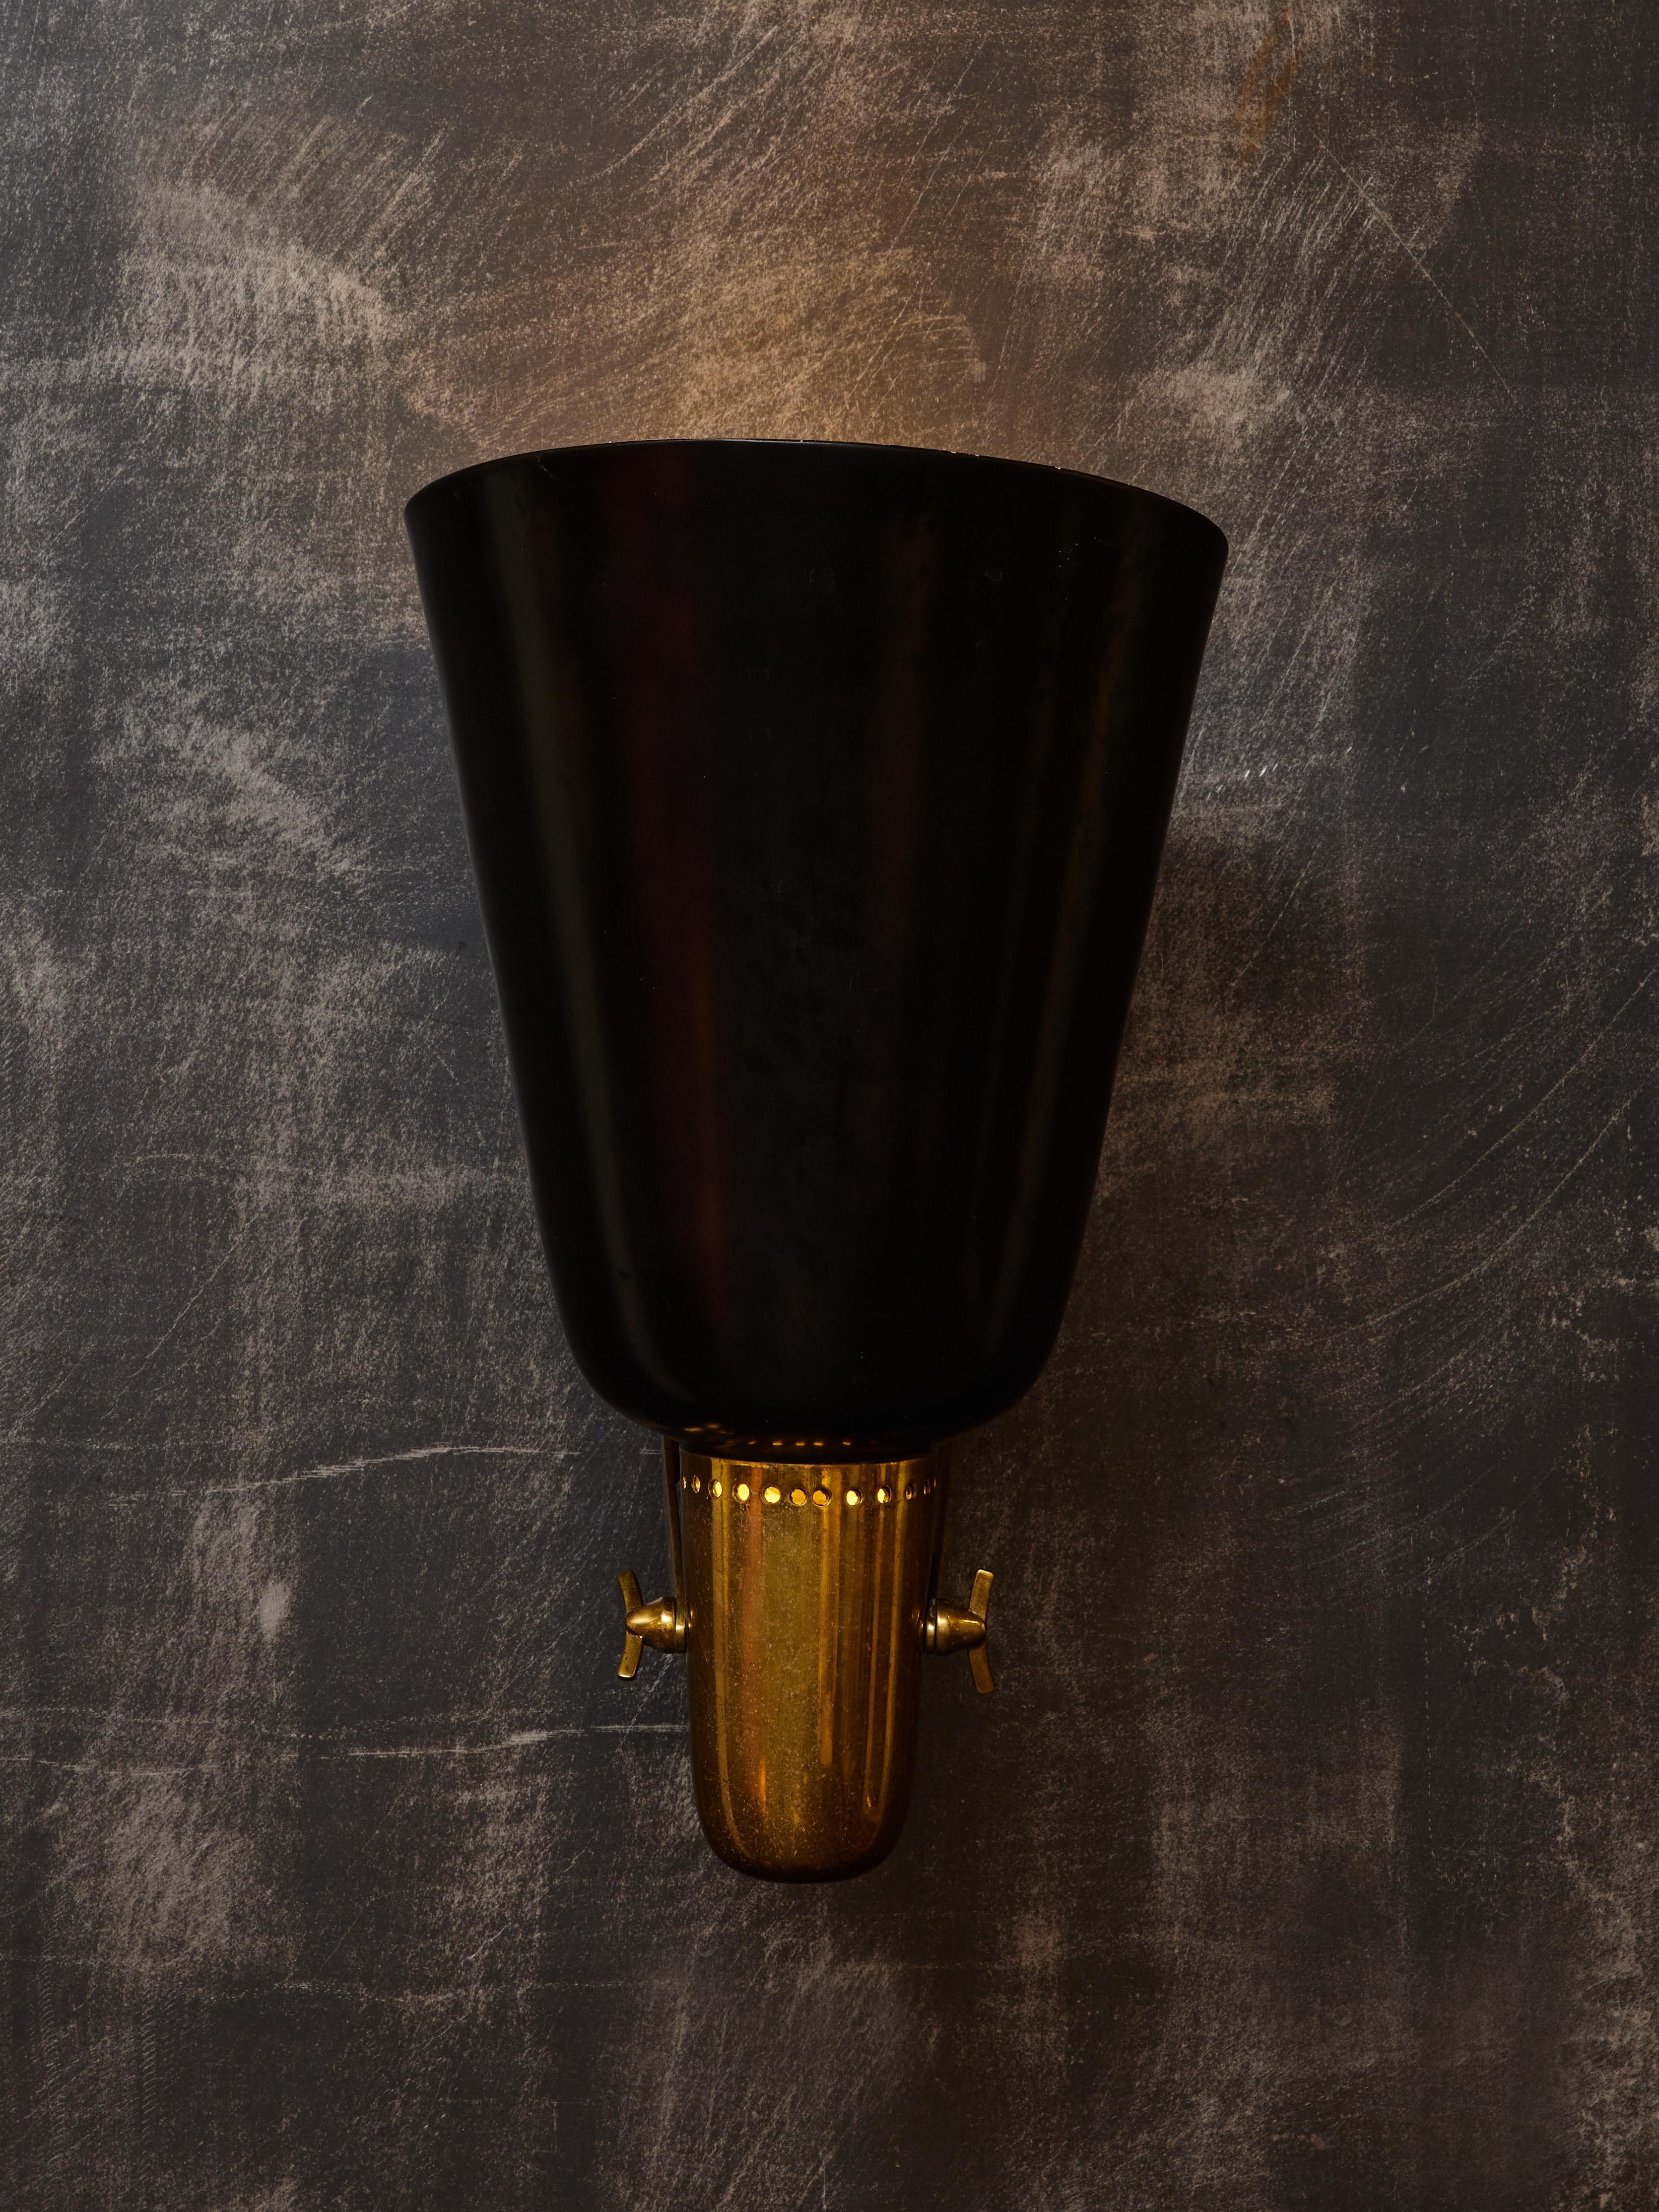 Pair of brass and painted metal wall sconces designed by Gino Sarfatti in 1946 for his lighting company Arteluce.

Originally a set of four, two sconces are now available. The displayed price is for the pair.